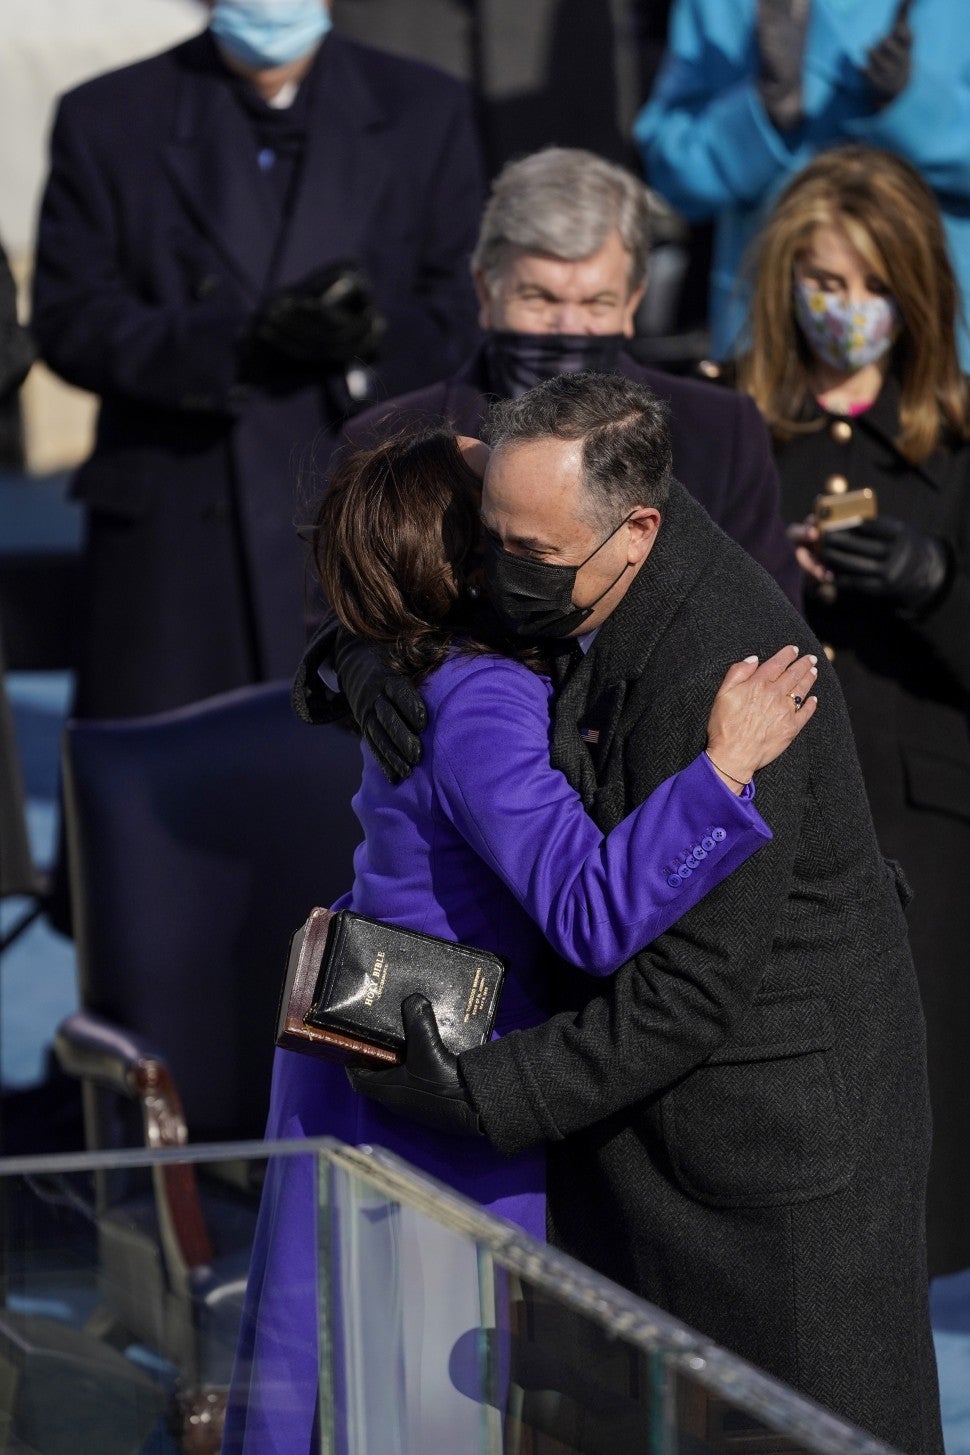 Kamala Harris(L) hugs her husband Douglas Emhoff after taking the oath of office from Supreme Court Justice Sonia Sotomayor during the 59th presidential inauguration in Washington, D.C. on Wednesday, Jan. 20, 2021.